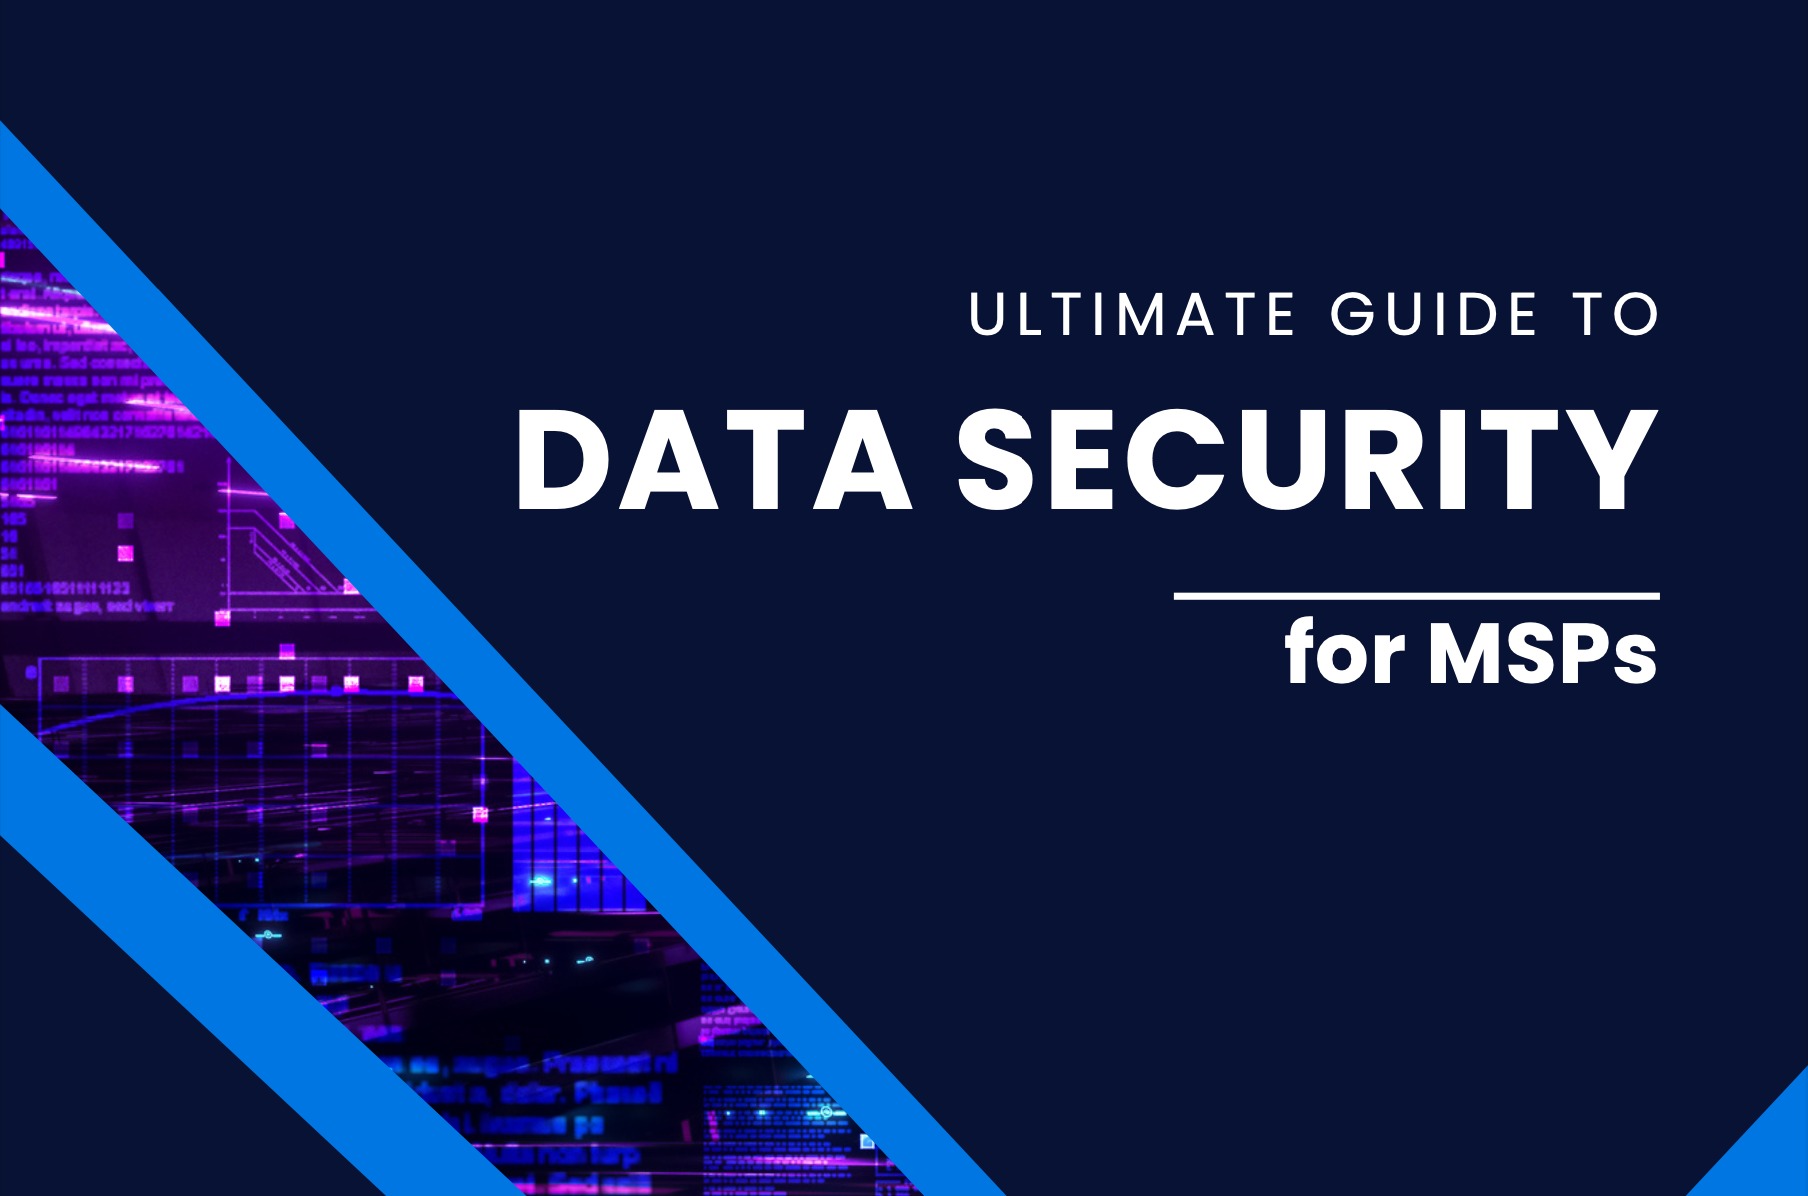 Ultimate Guide to Data Security for MSPs